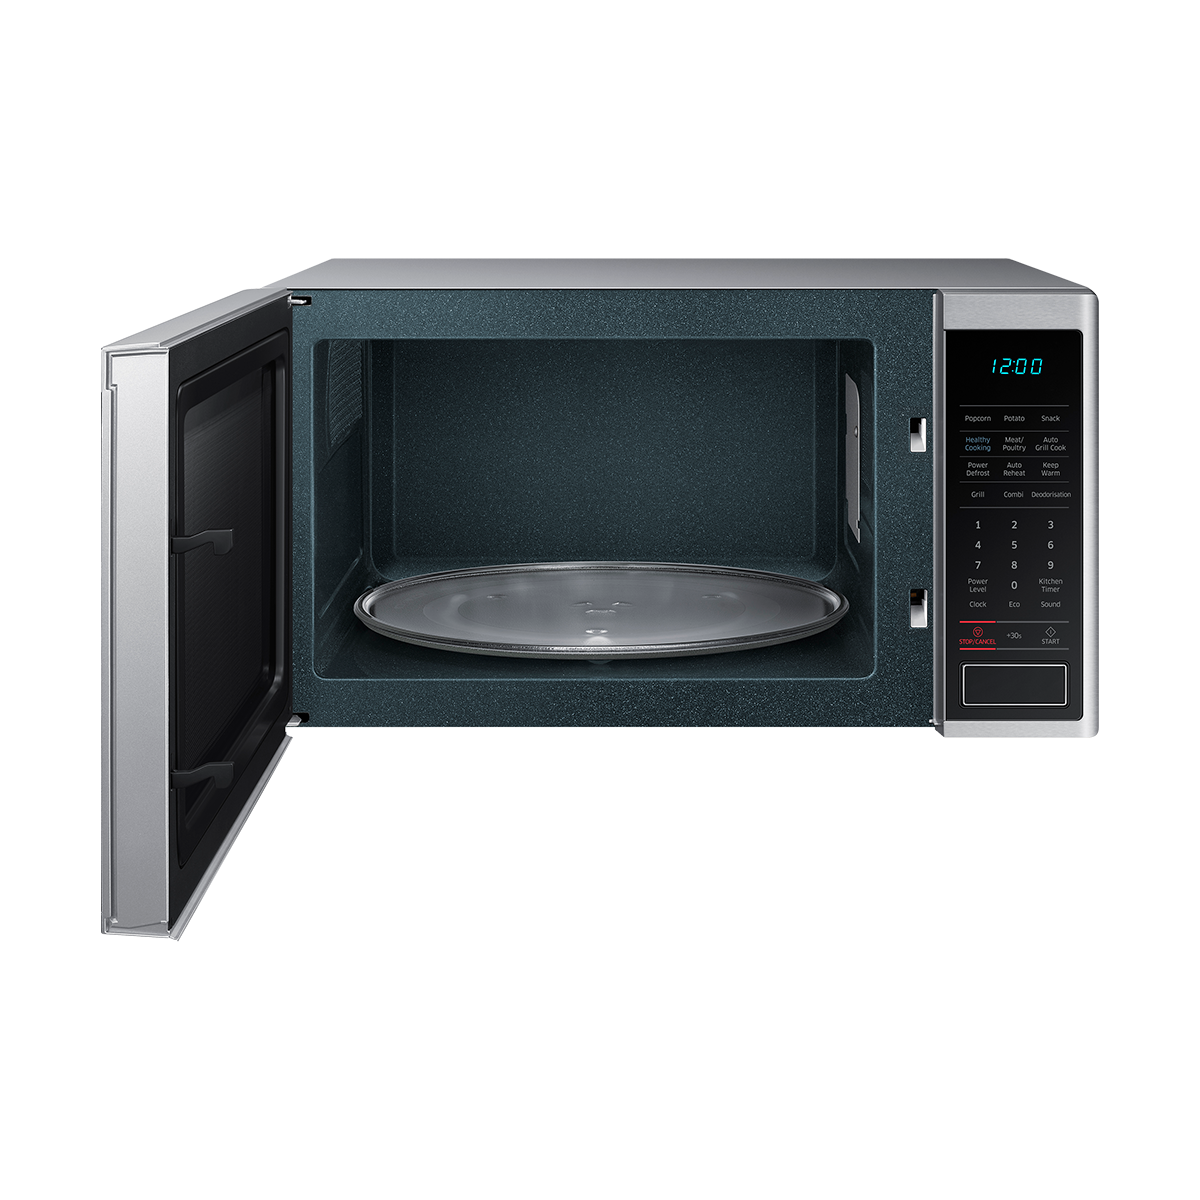 Samsung Microwave Oven + Grill